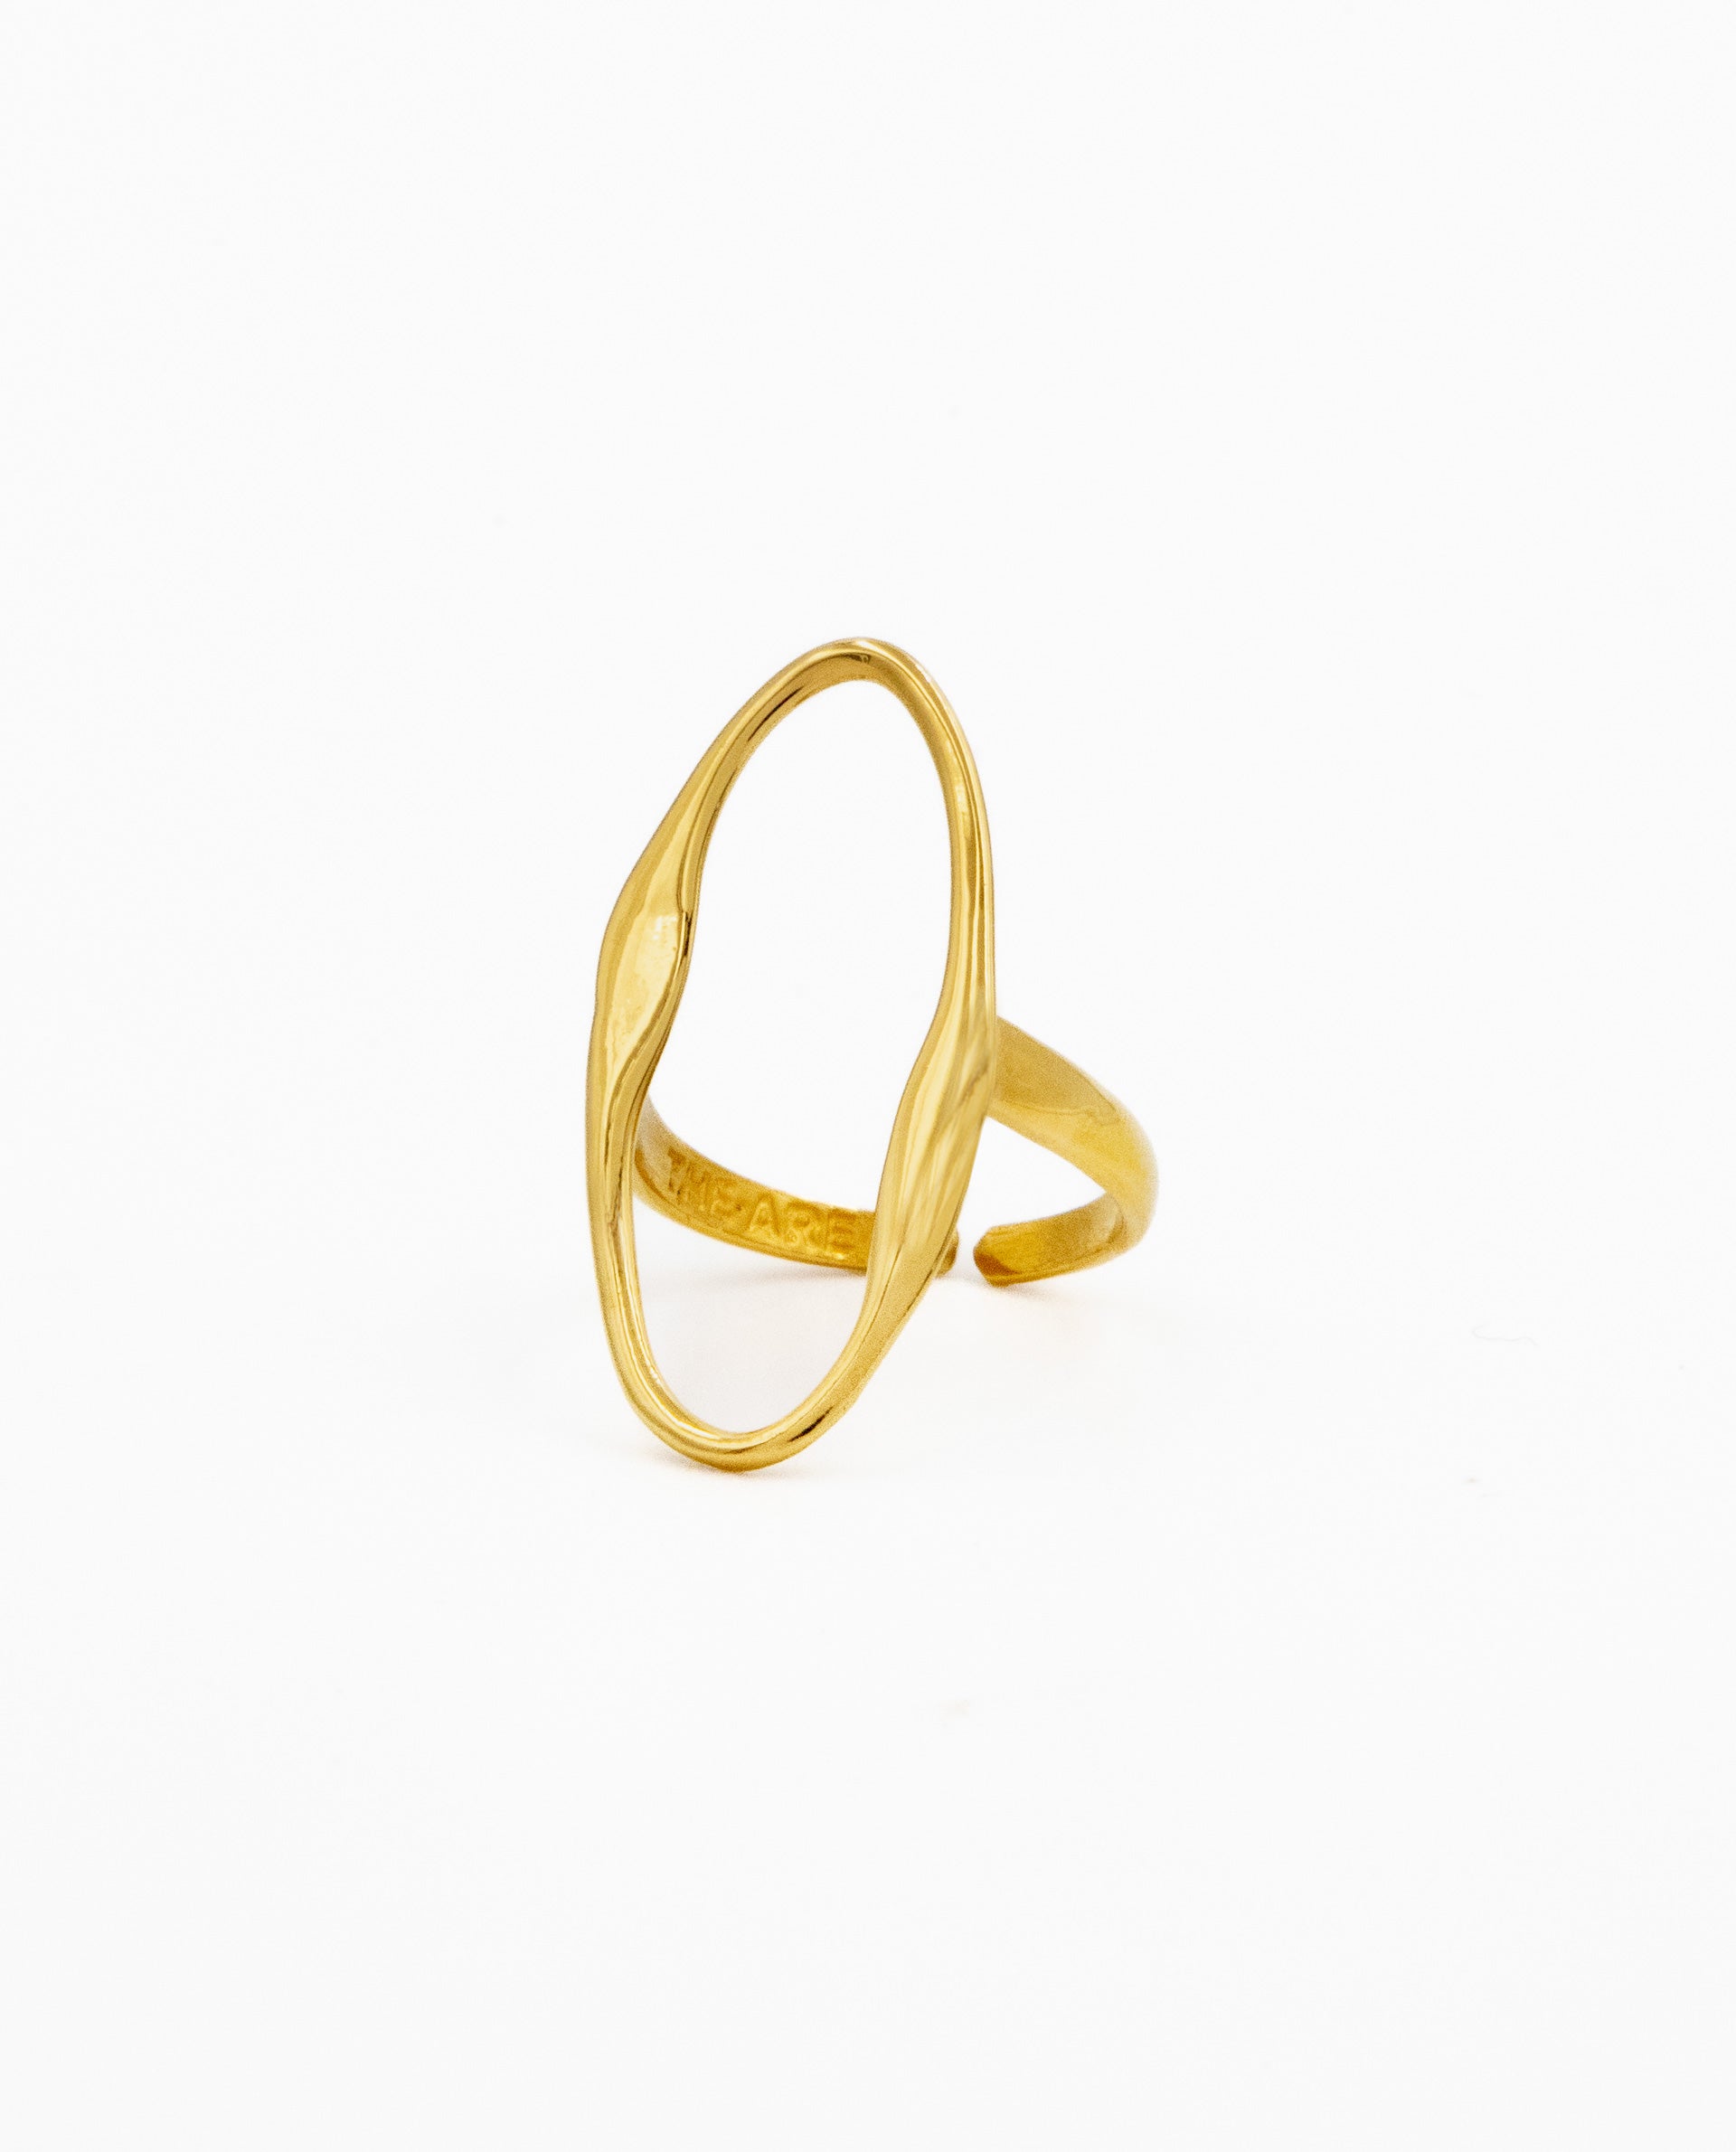 HALO RING - GOLD PLATED SILVER